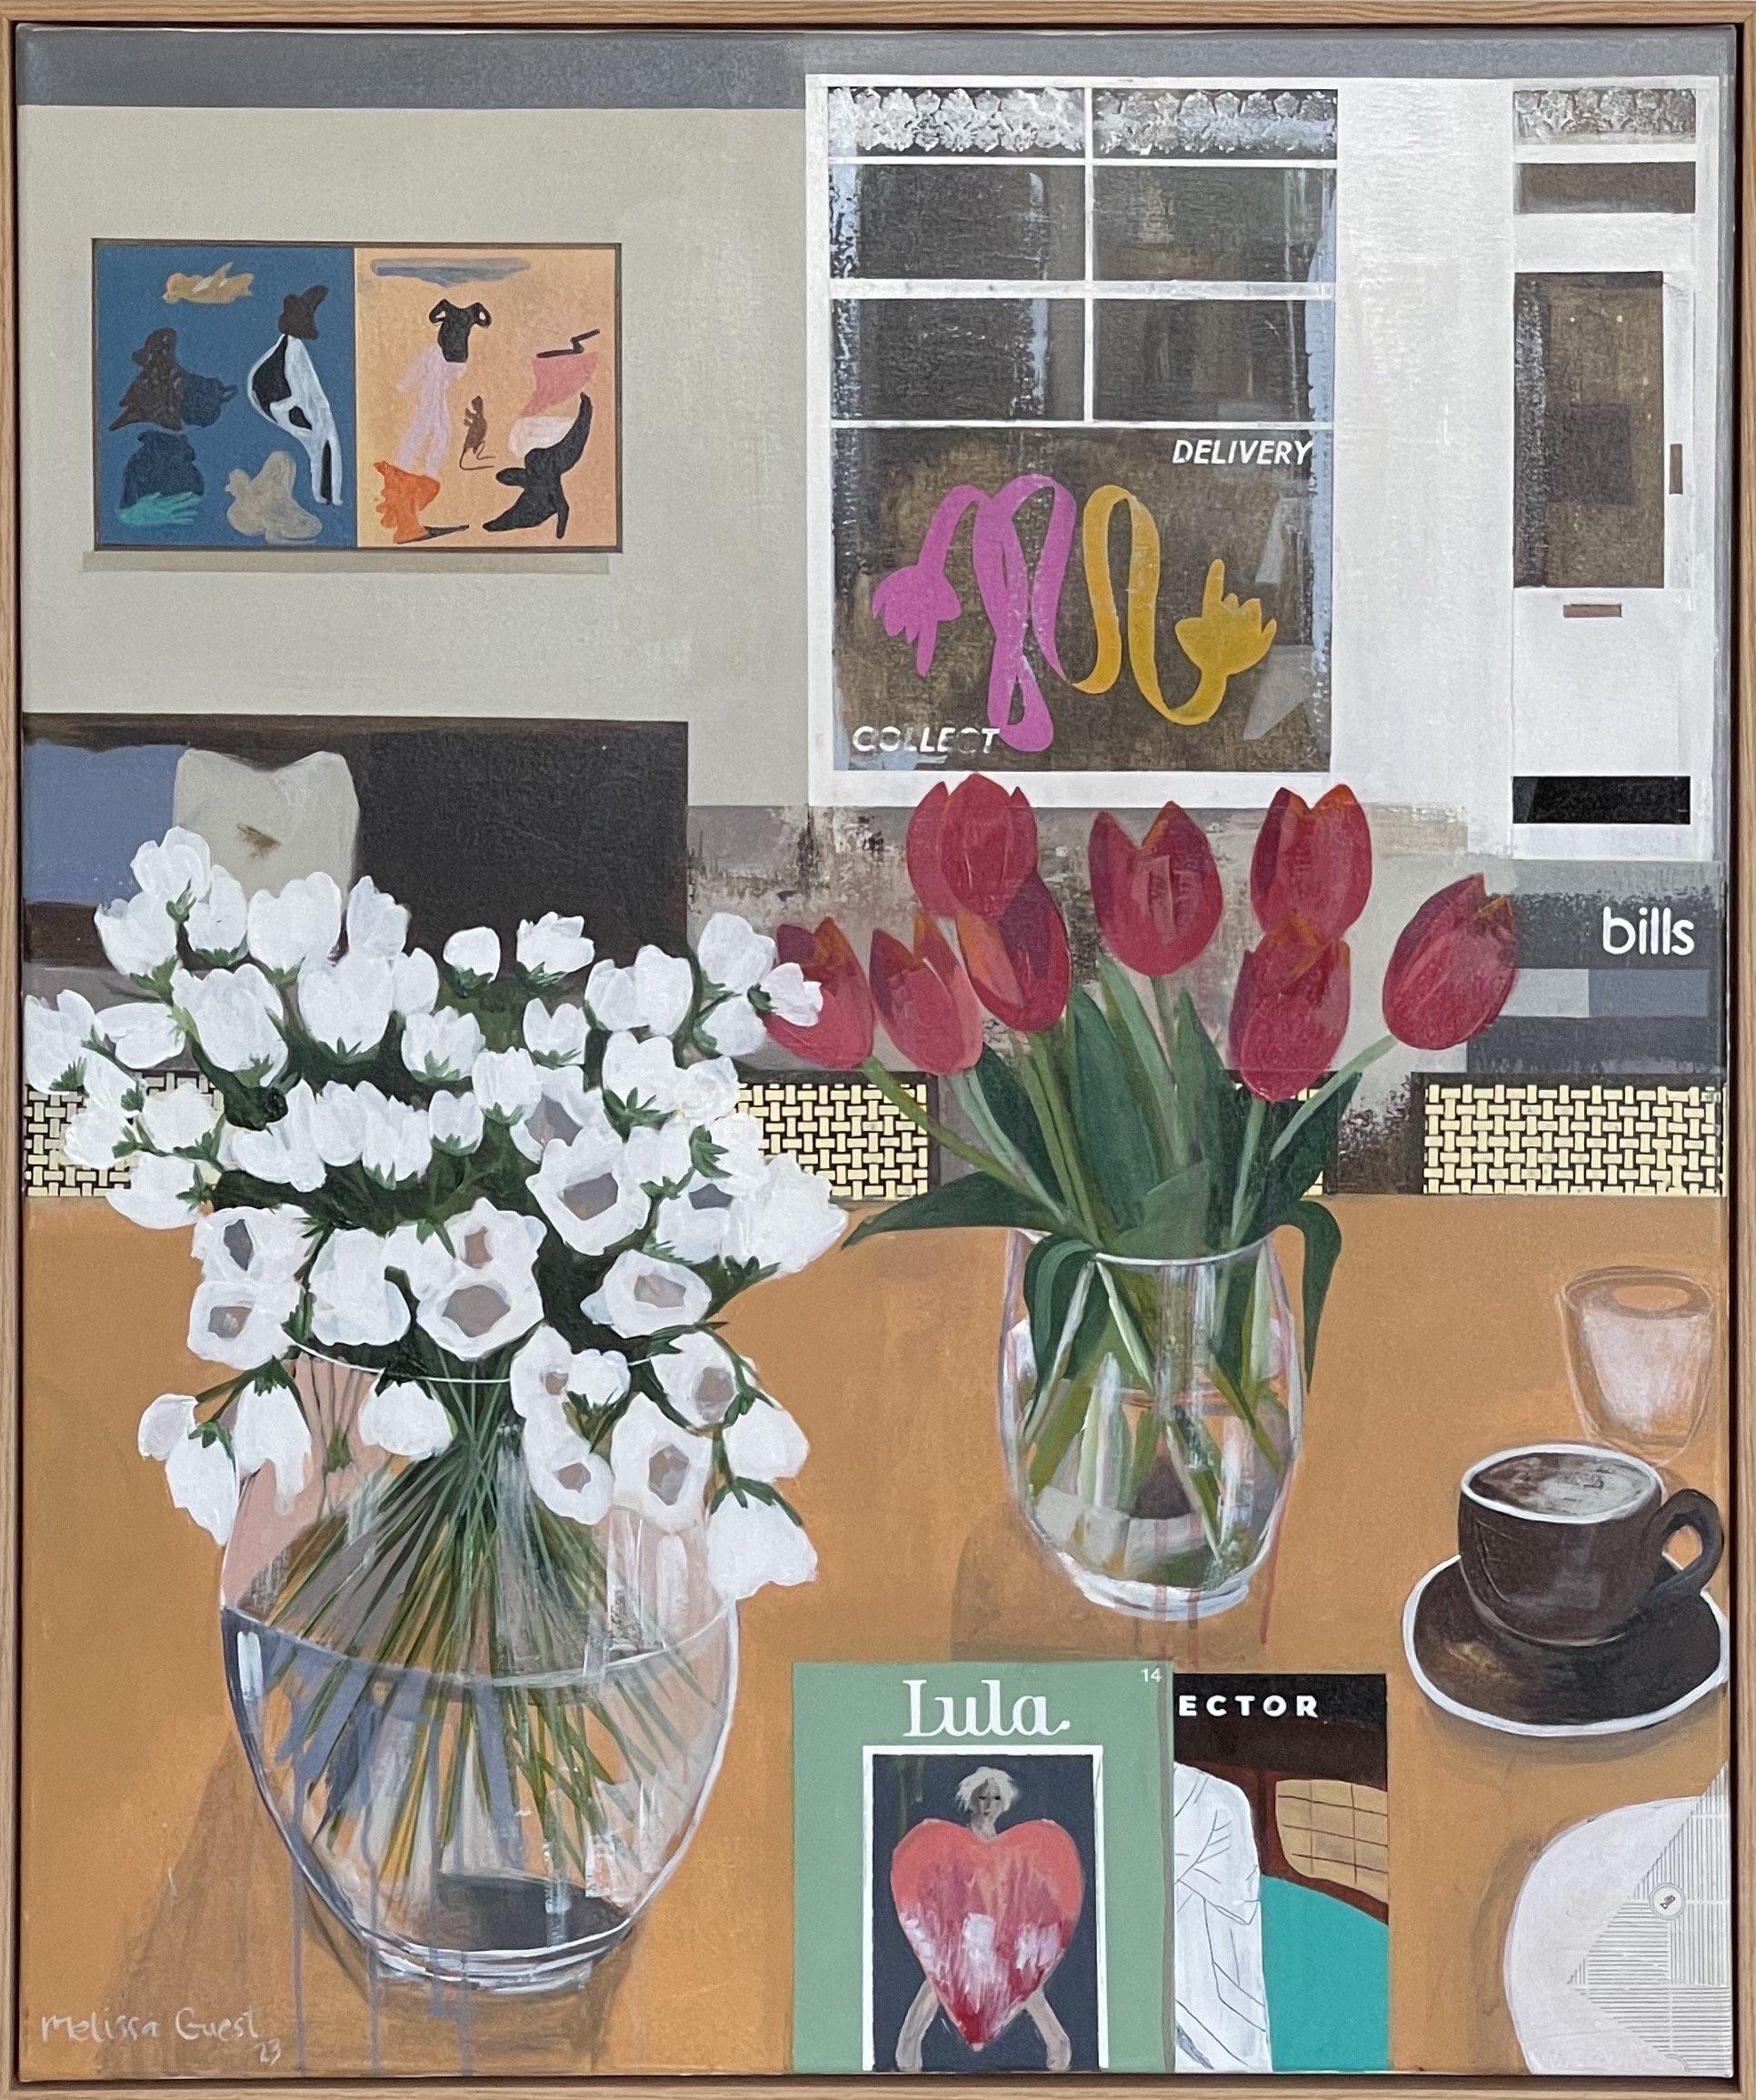 MELISSA GUEST Breakfast At Bills With Tulips And White Flowers 92x76cm framed mixed media on canvas $3200